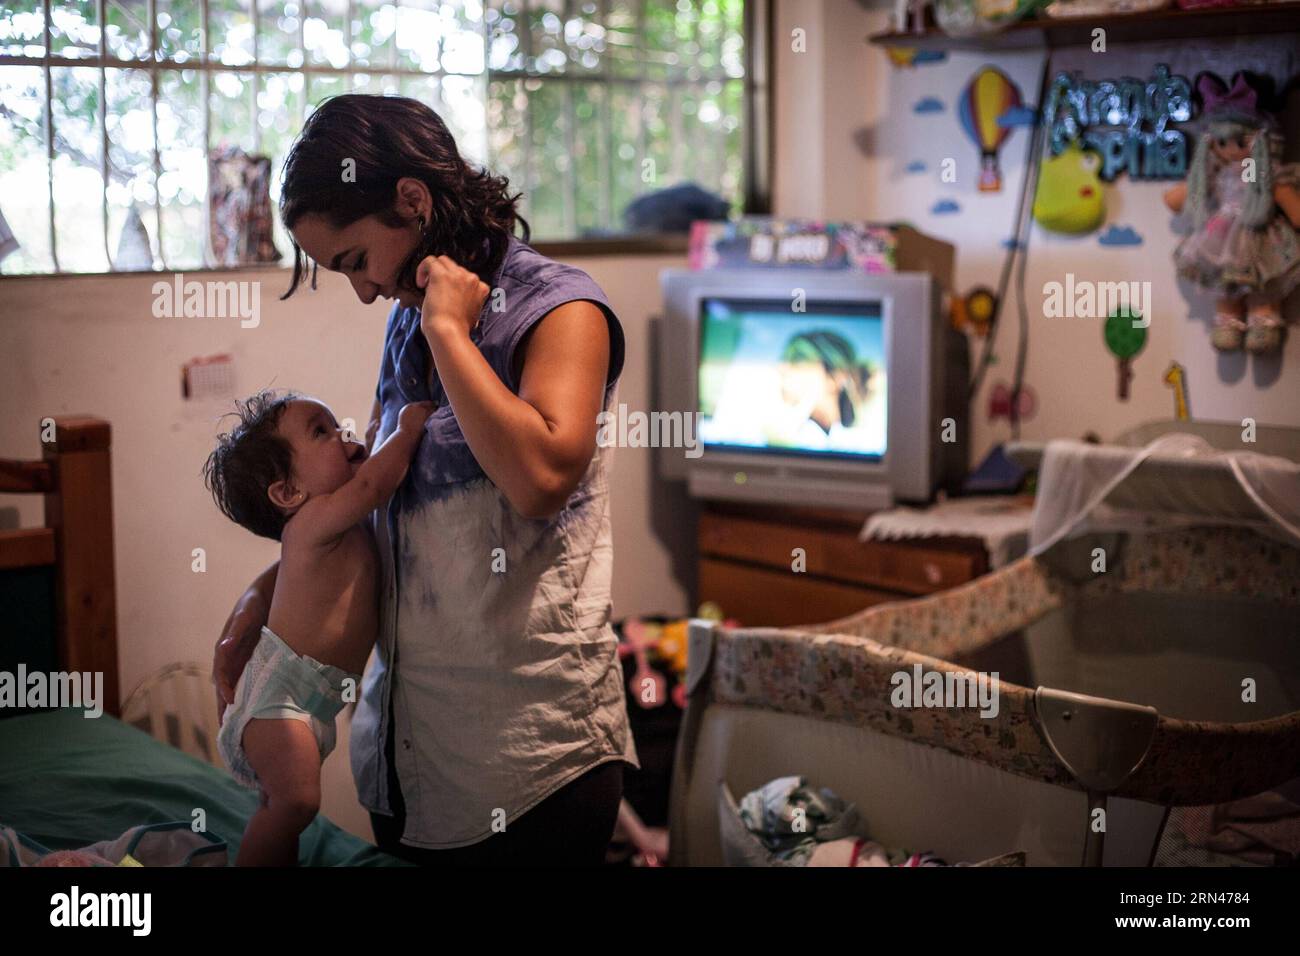 Andrea Romero (R) plays with her daughter Ananda in Caracas, capital of Venezuela, May 9, 2015, the eve of the Mother s Day. Andrea Romero, a makeup technician and visual editor who gave birth to Ananda at 21, is fully dedicated to her daughter. Boris Vergara) VENEZUELA-CARACAS-MOTHER S DAY e BorisxVergara PUBLICATIONxNOTxINxCHN   Andrea Romero r PLAYS With her Daughter Ananda in Caracas Capital of Venezuela May 9 2015 The Eve of The Mother S Day Andrea Romero a Makeup Technician and Visual Editor Who Gave Birth to Ananda AT 21 IS FULLY dedicated to her Daughter Boris Vergara Venezuela Caracas Stock Photo